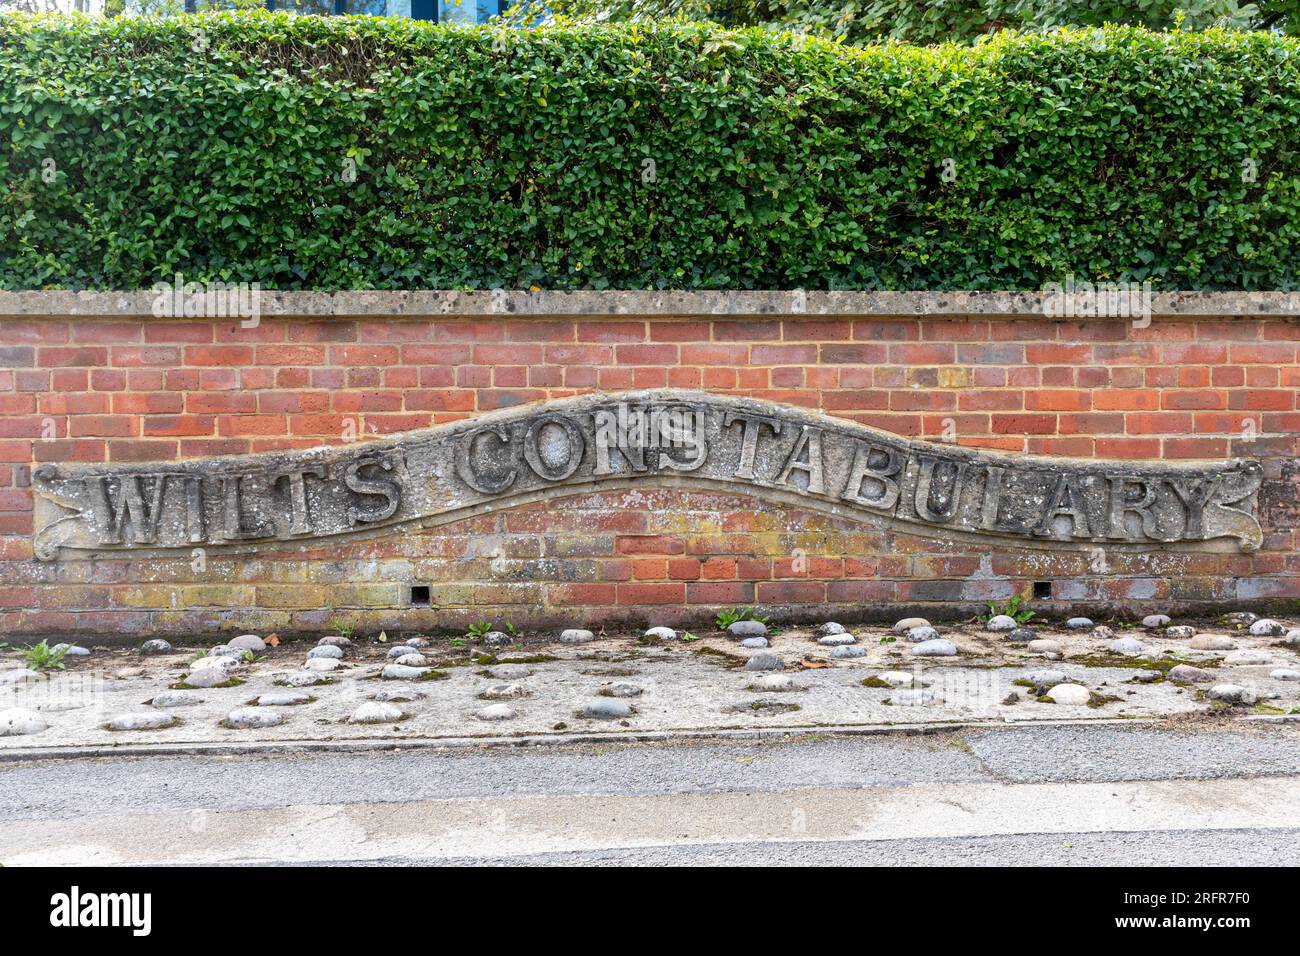 Wilts Constabulary sign on the wall outside a police station in Marlborough, Wiltshire, England, UK Stock Photo